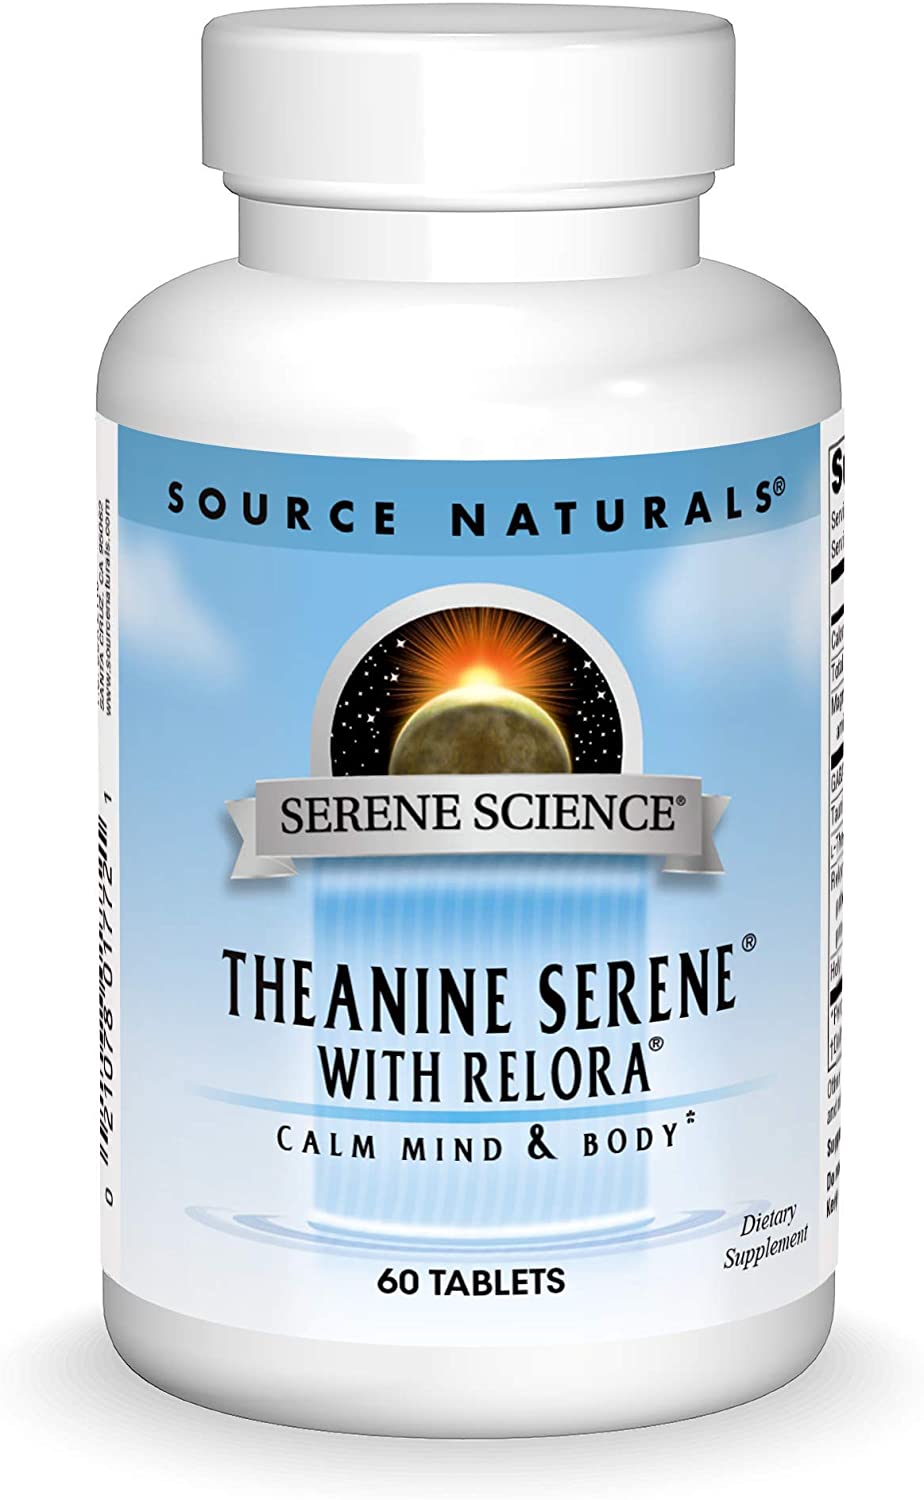 Product Listing Image for Source Naturals Theanine Serene with Relora